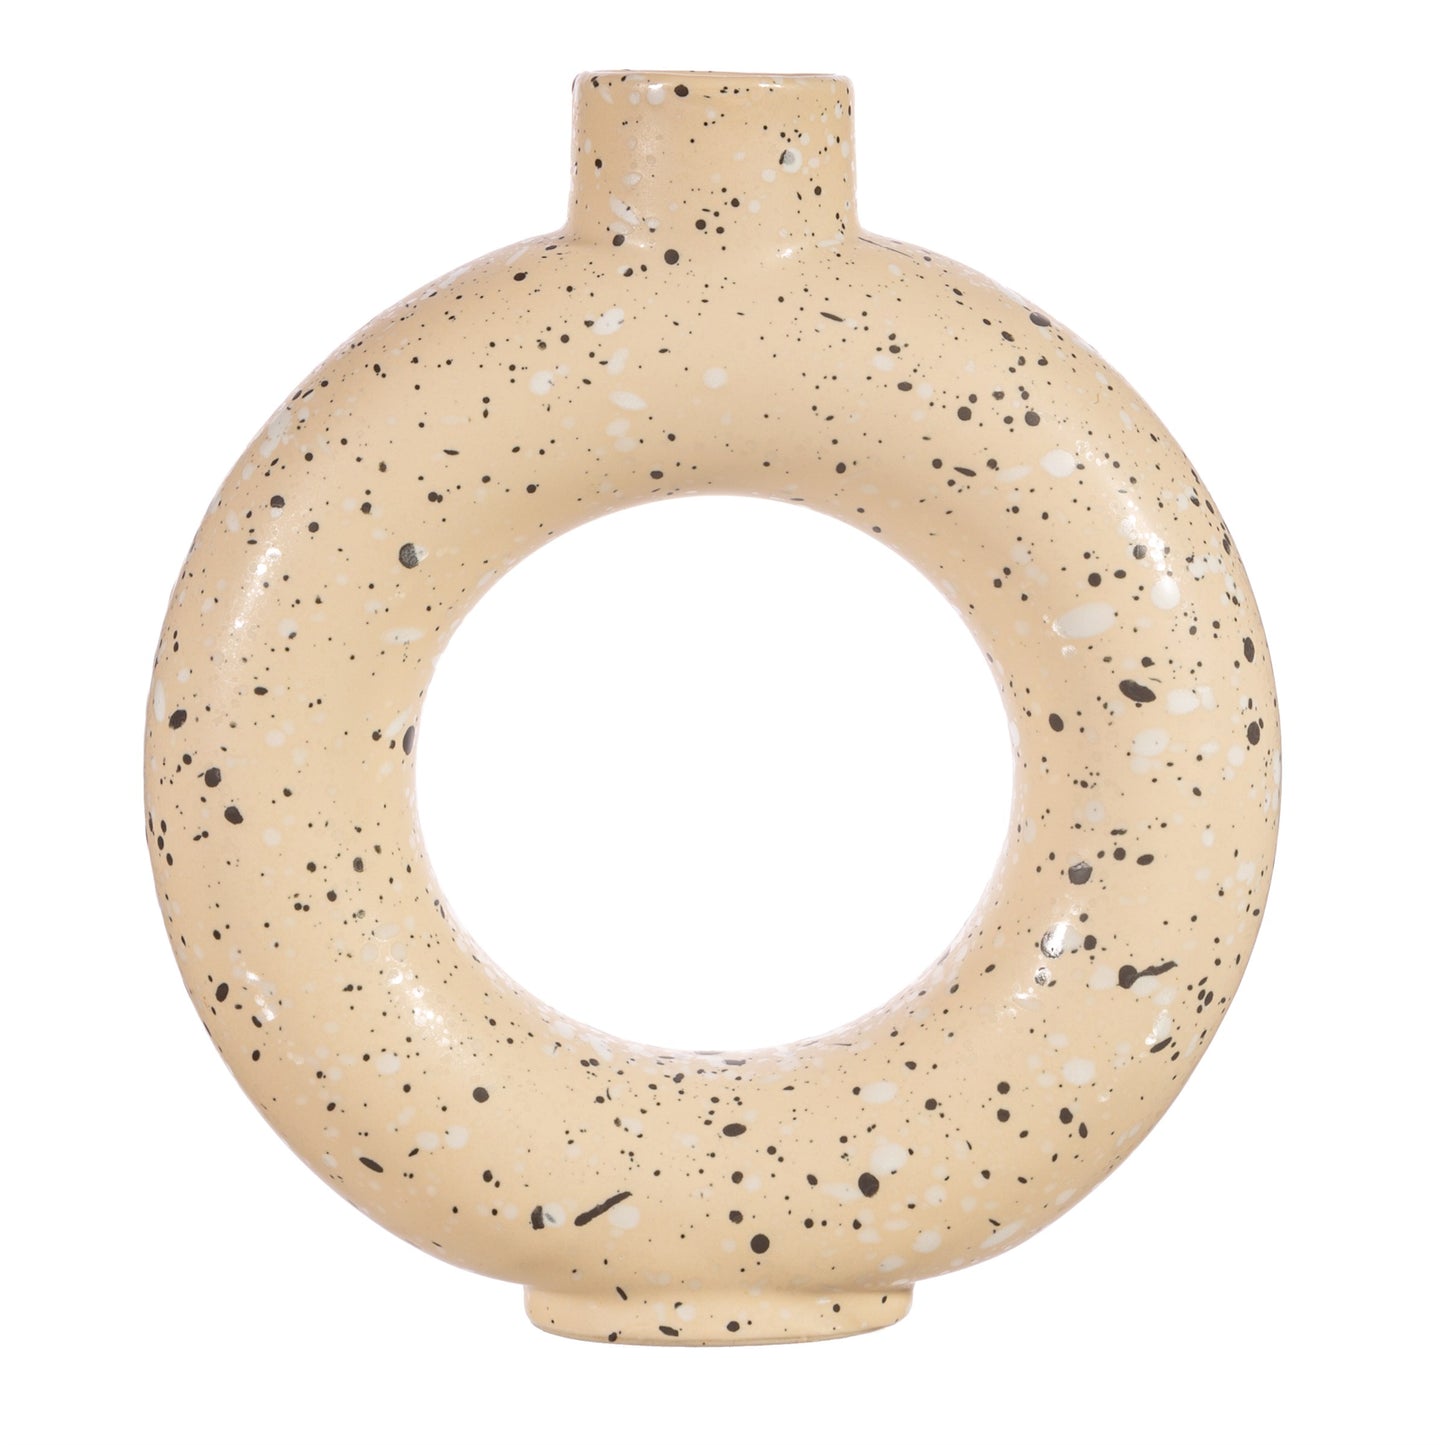 Sand Terrazzo Speckled Circle Vase, Large